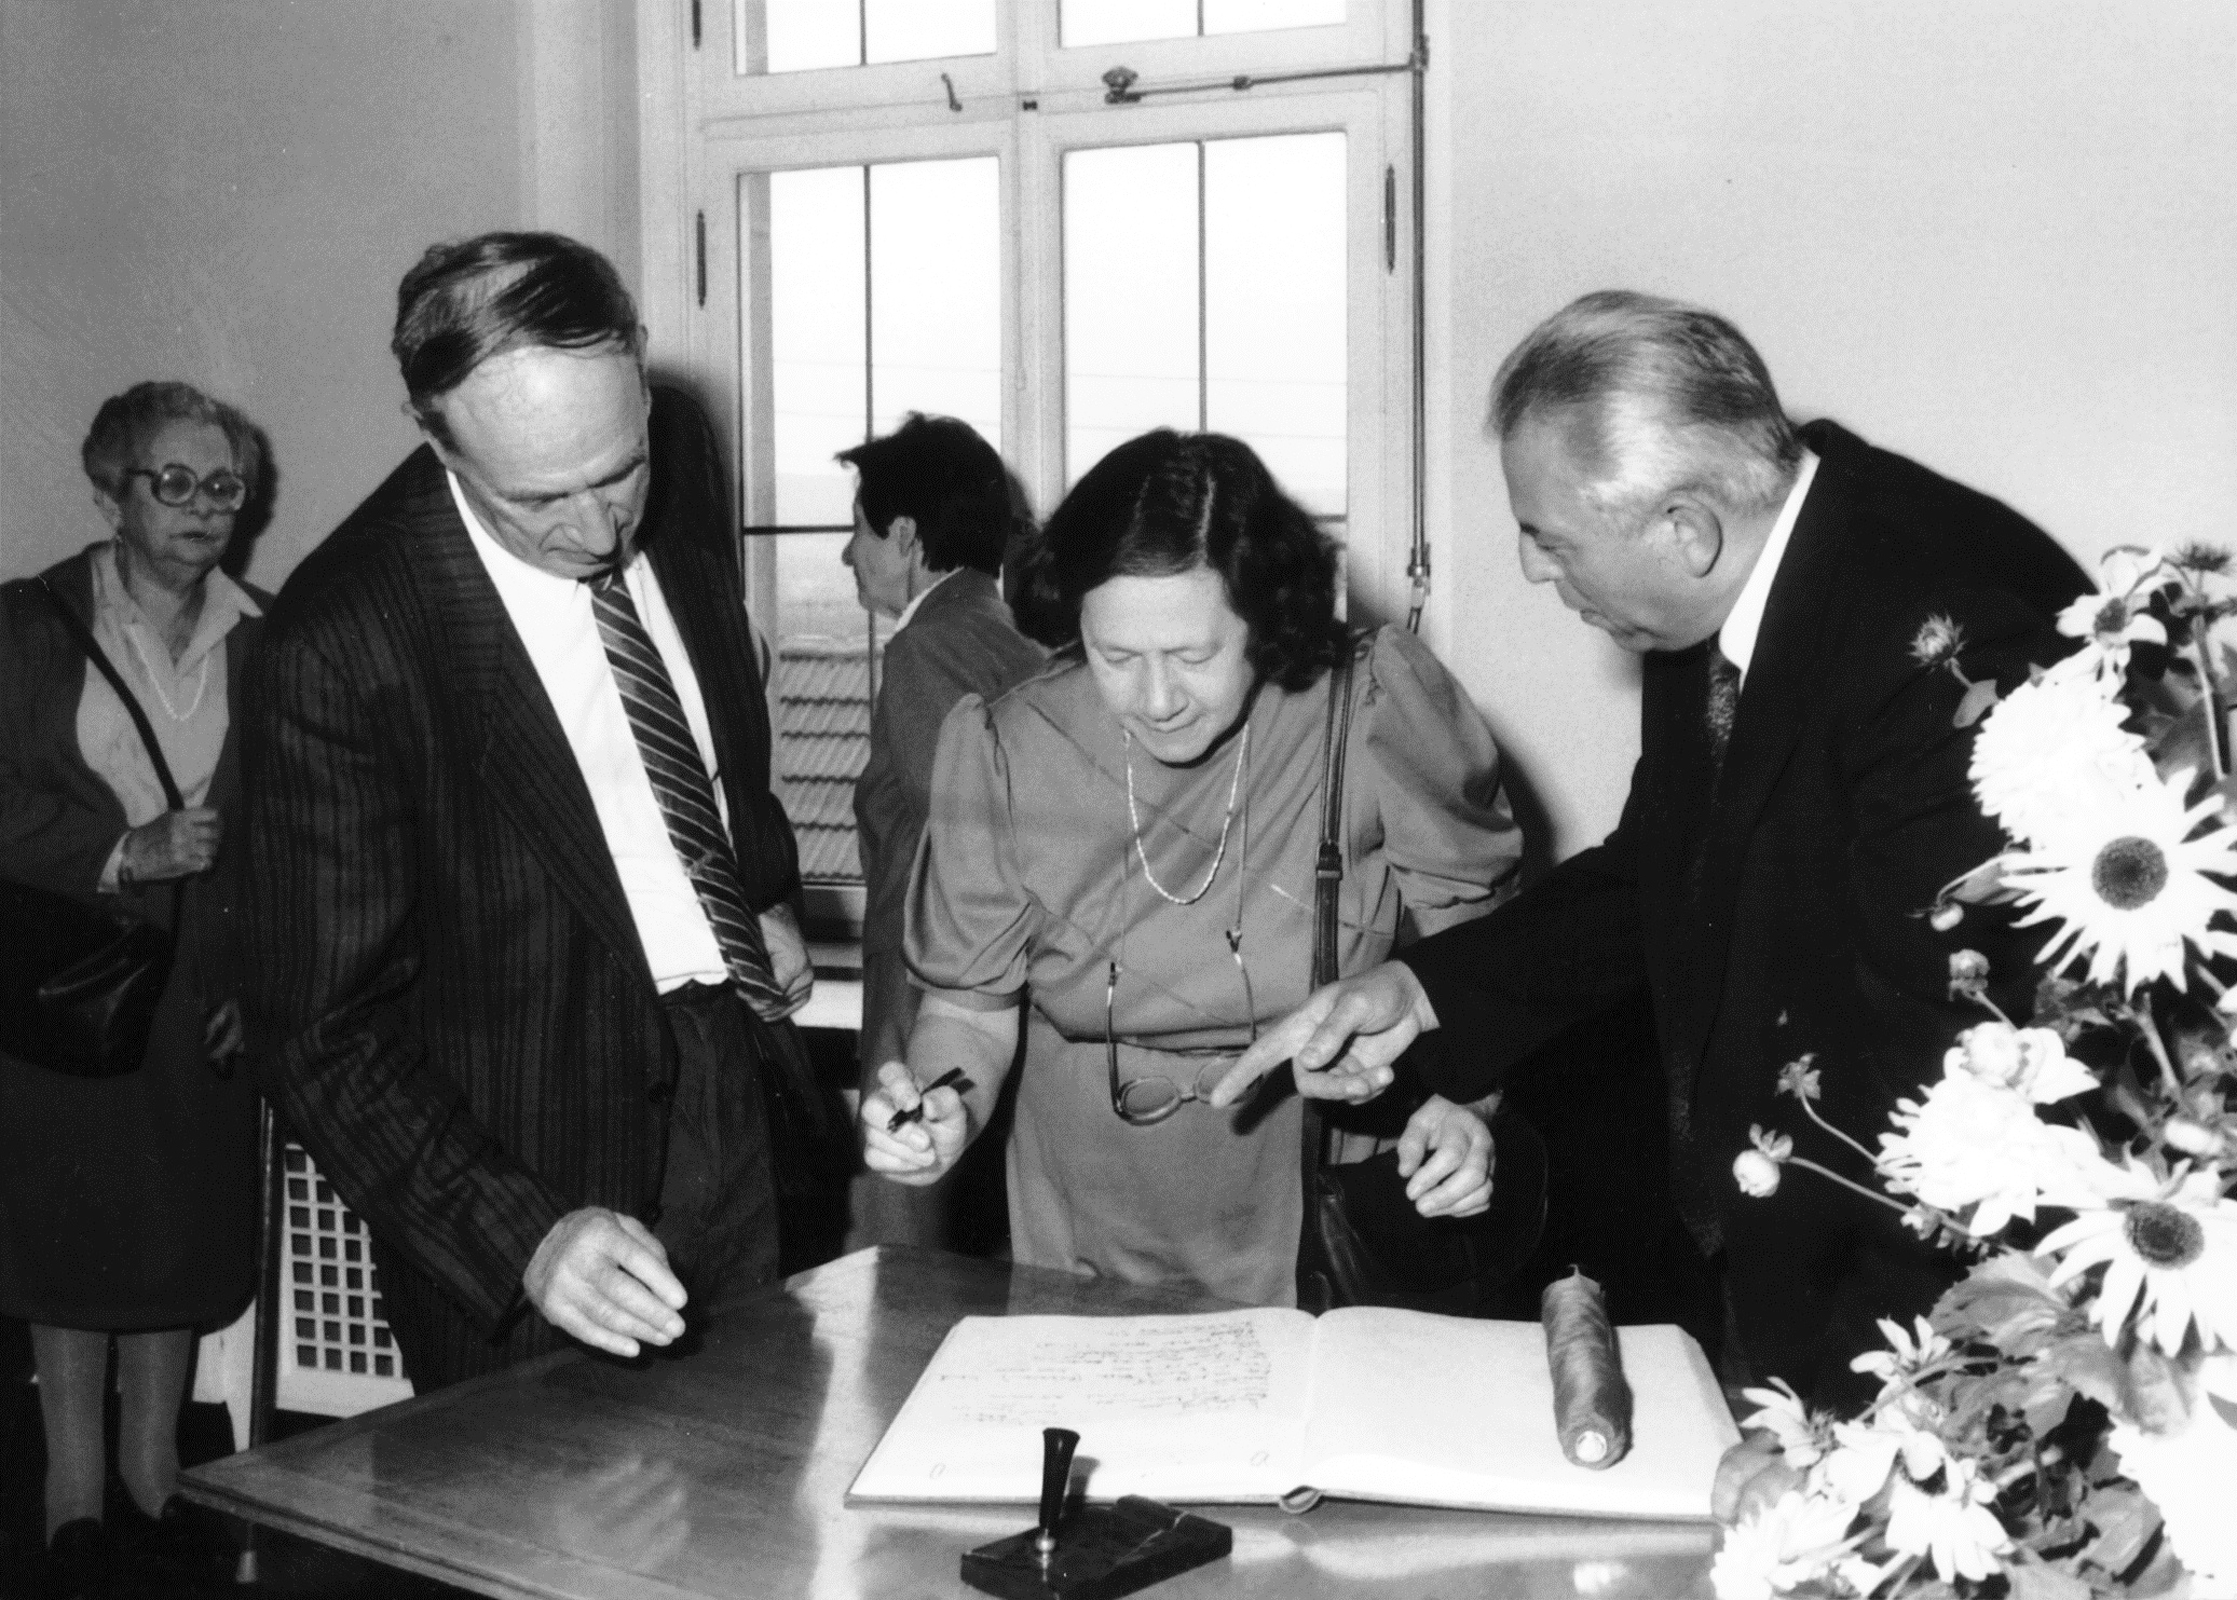 Ruth Solomon (center) writing her name in the City of Hechingen's guestbook.